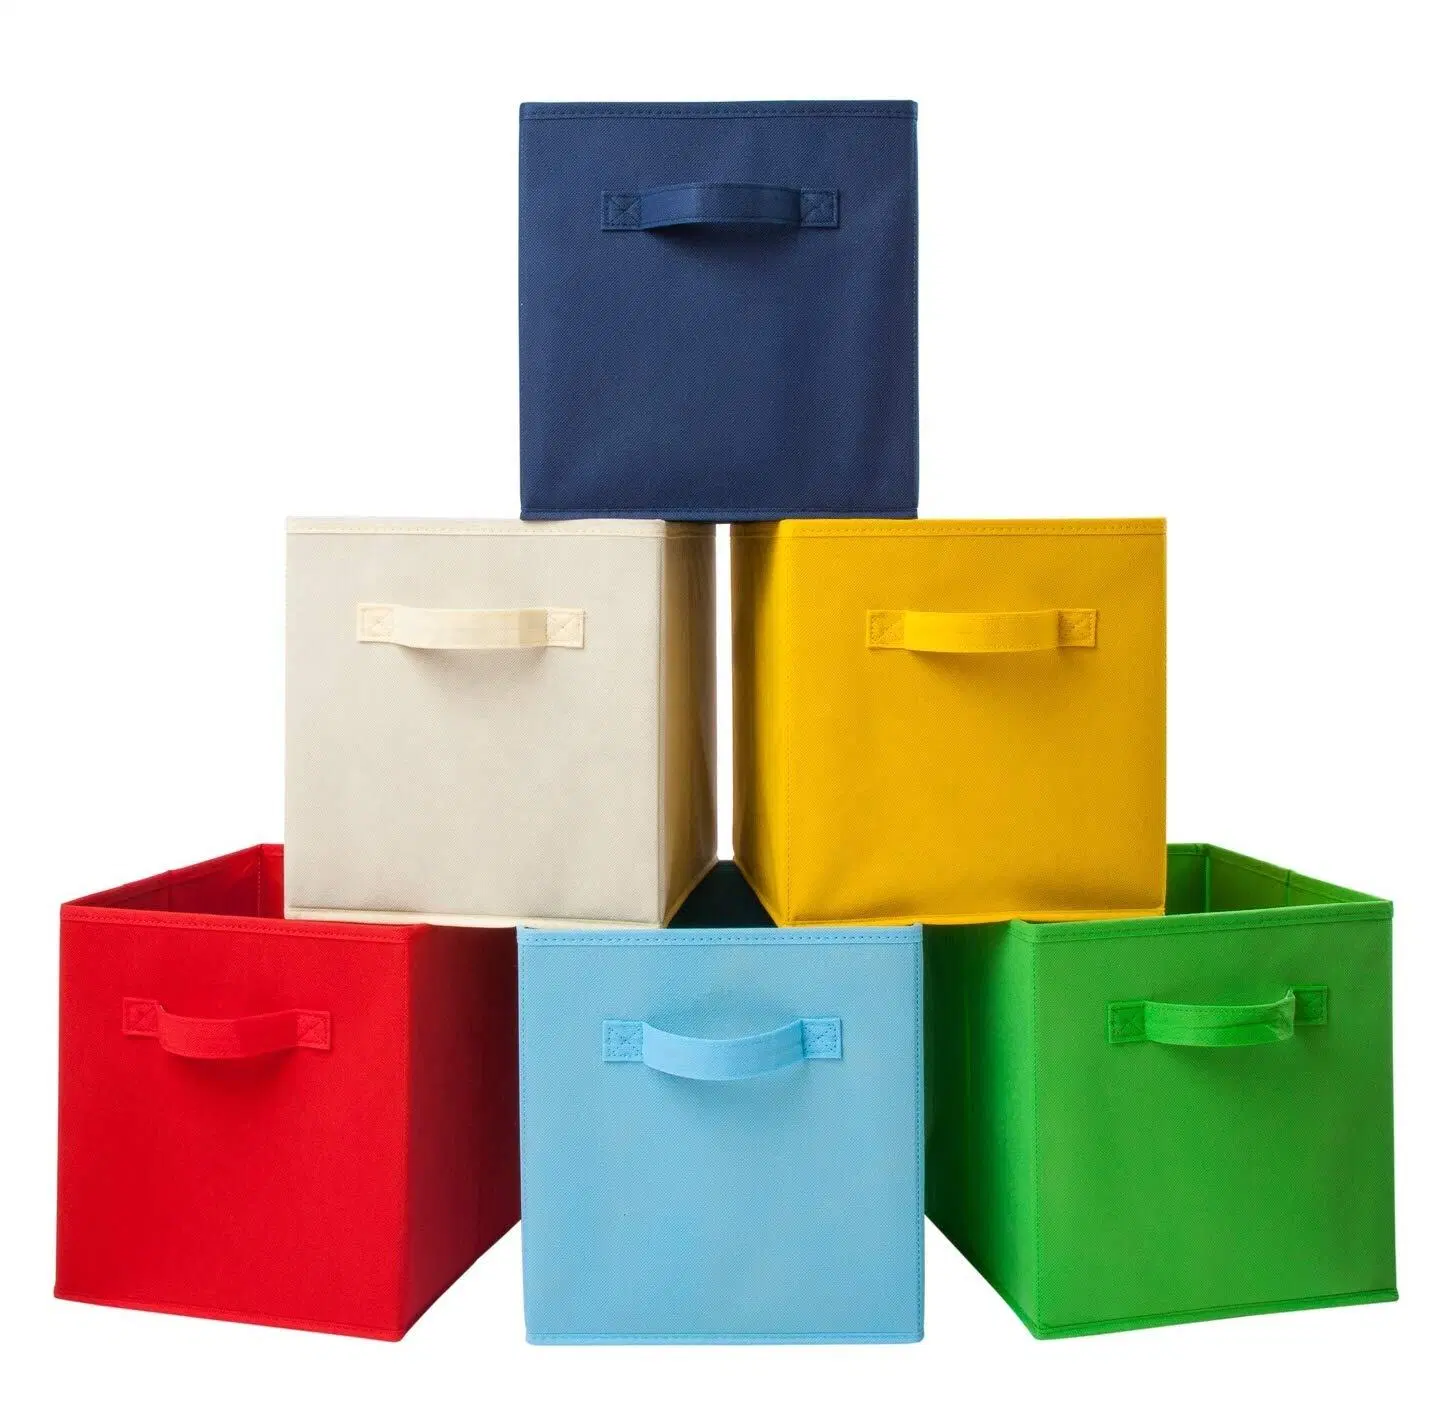 Foldable Fabric Organization Box Bins and Storage for Home